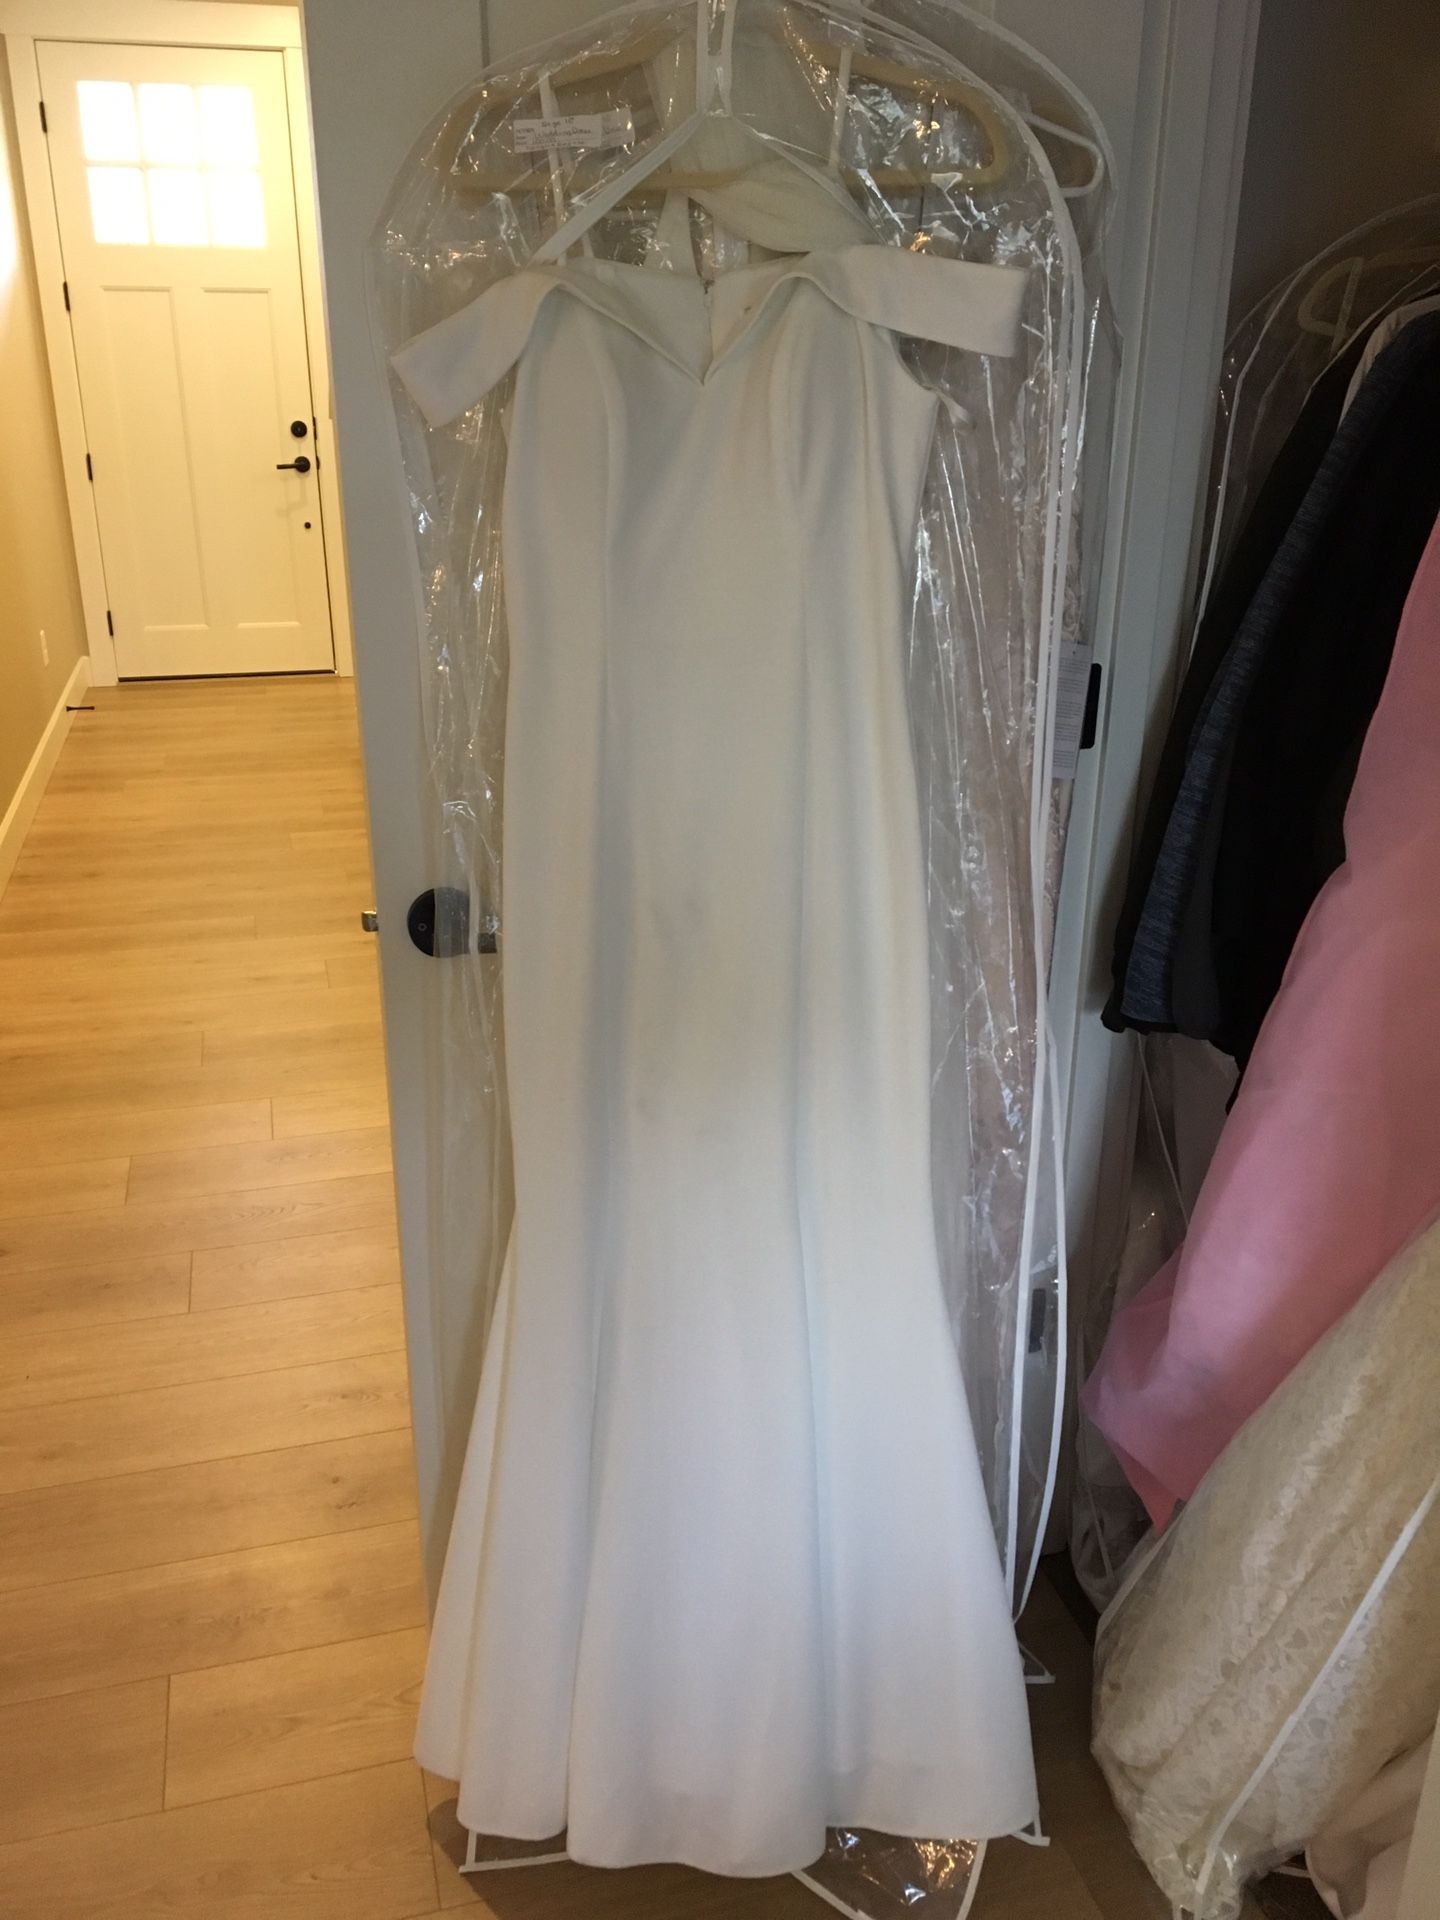 Size 10 wedding dress. Off white with off white shawl. No beads or sequins. Simple classic. No train. Worn once. Great condition.